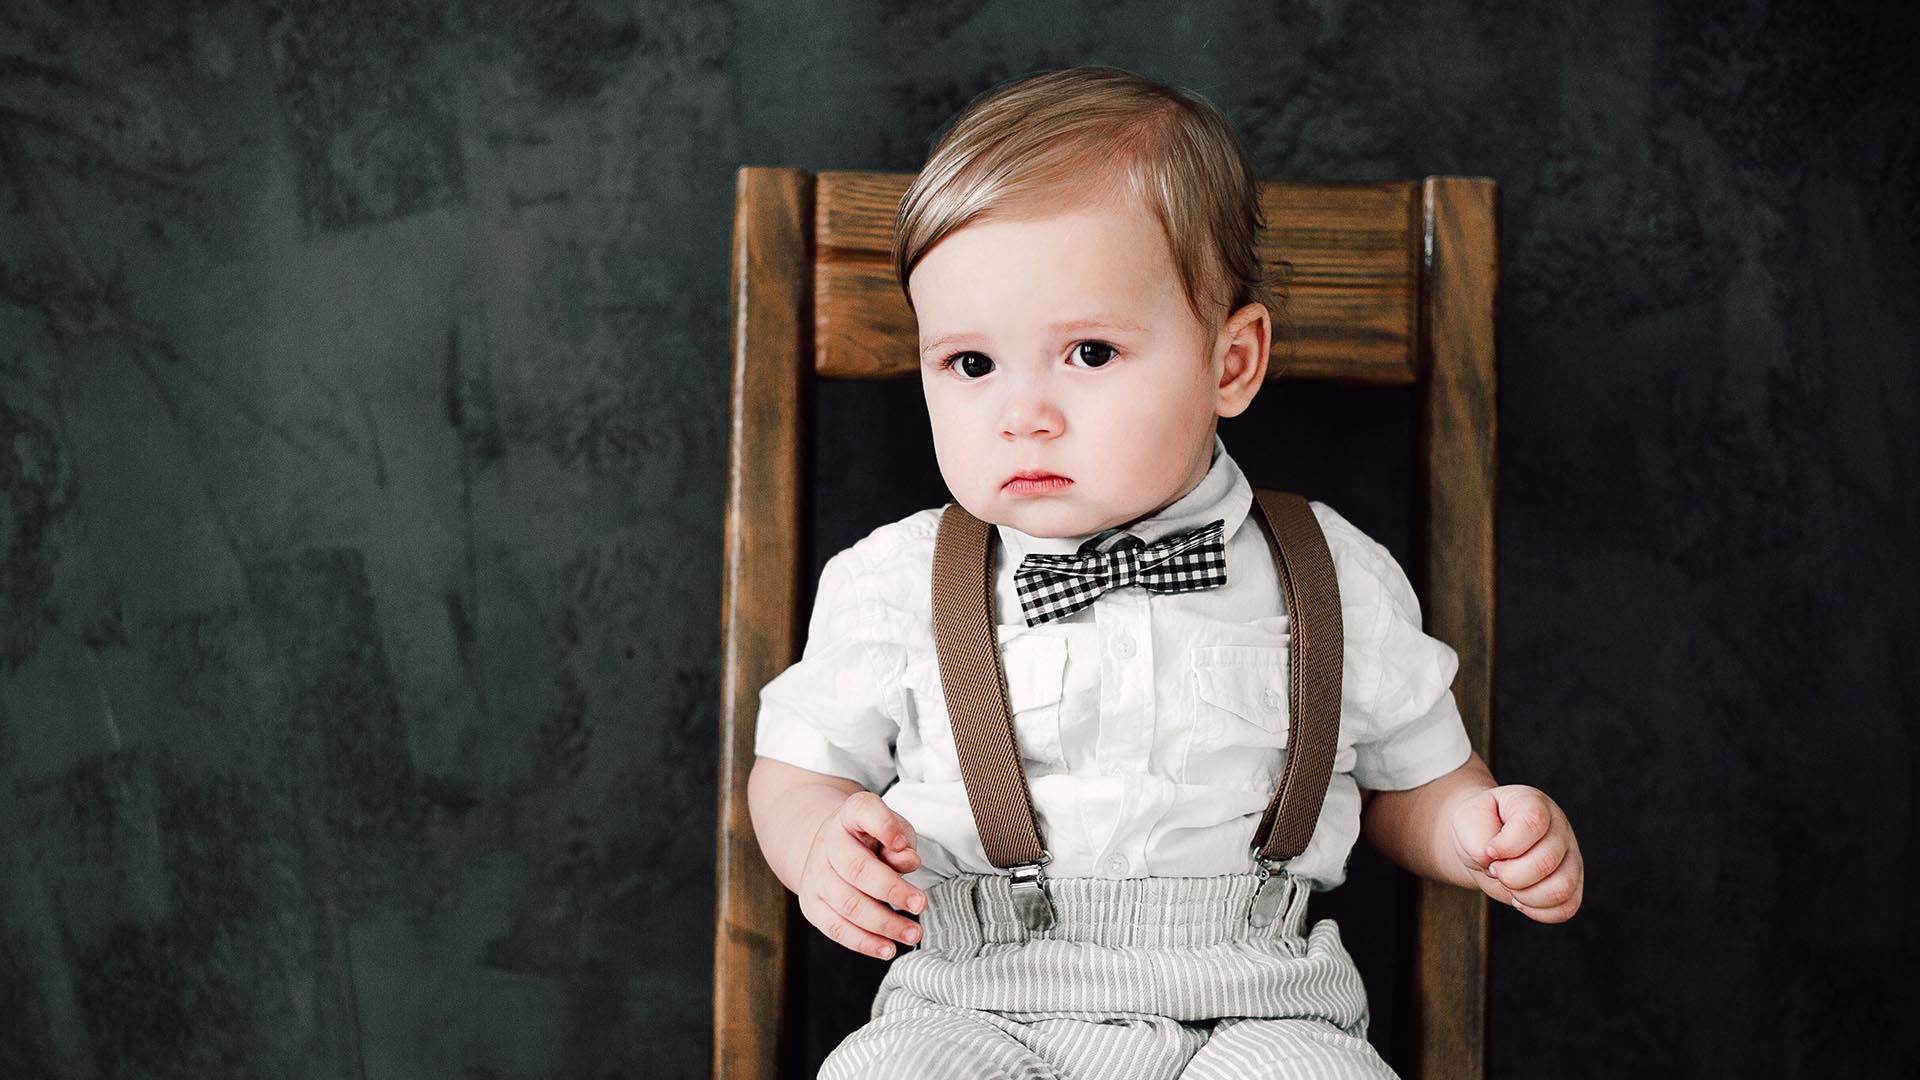 Baby Wedding Outfit Boy Christening Outfits For Boy Baptism | vlr.eng.br